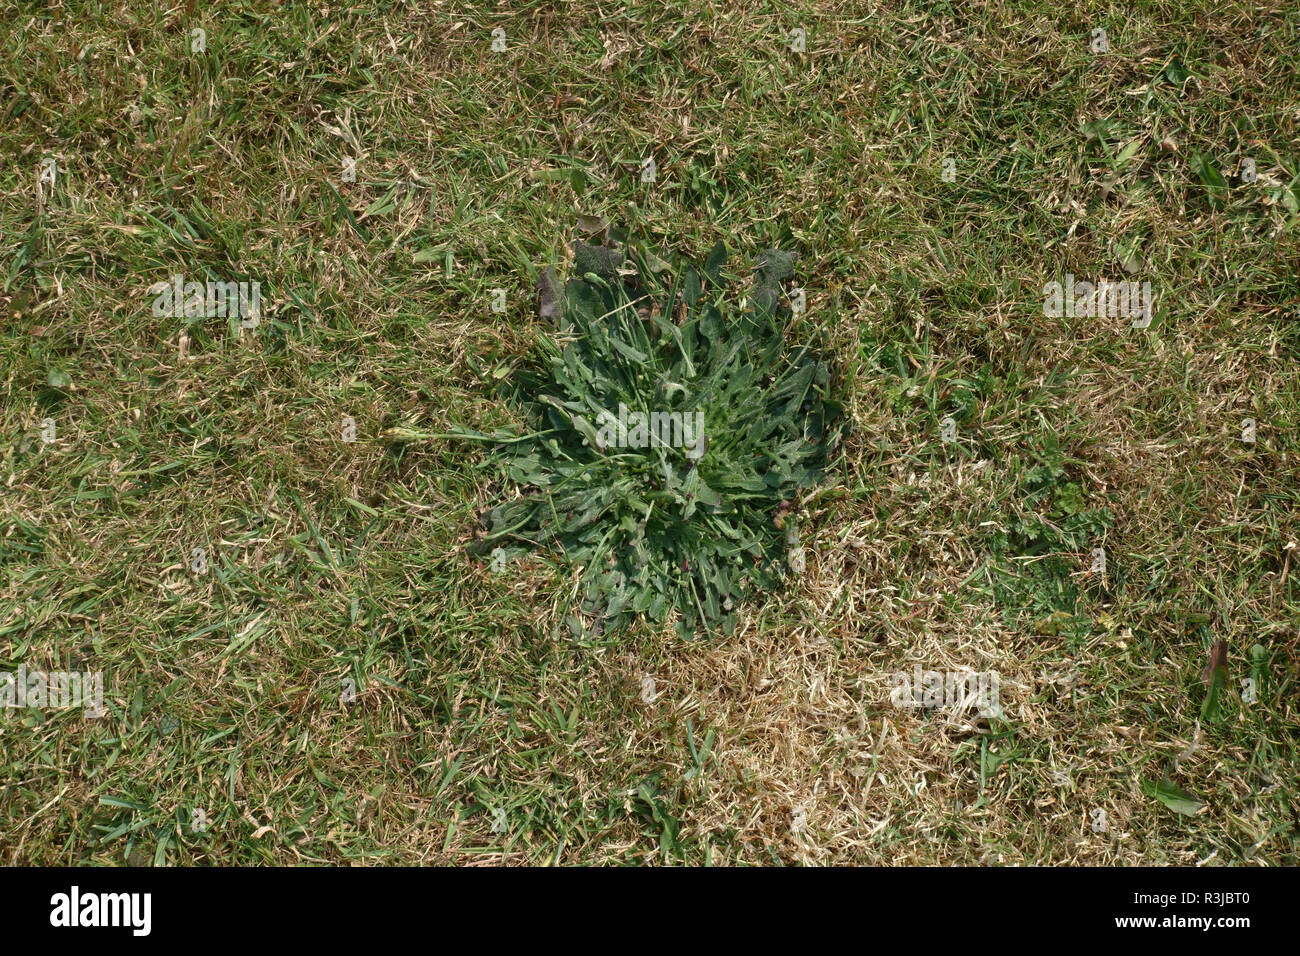 Smooth hawksbeard, Crepis capillaris, rosette of leaves and prostrate flower stems in a mown coastal lawn Stock Photo